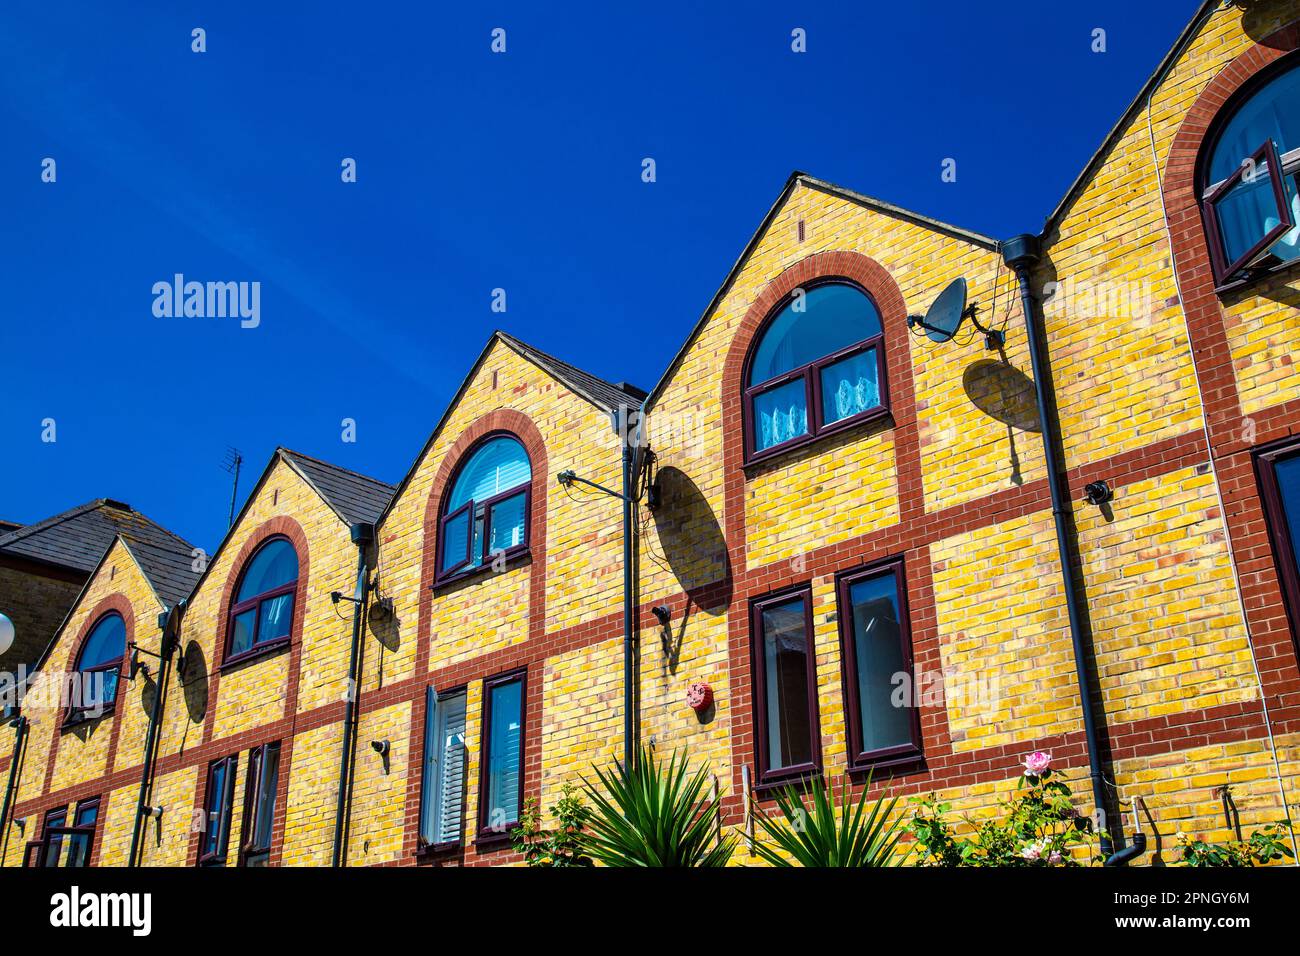 Brick gabled houses along Vaughan Way in Wapping, London, England, UK Stock Photo